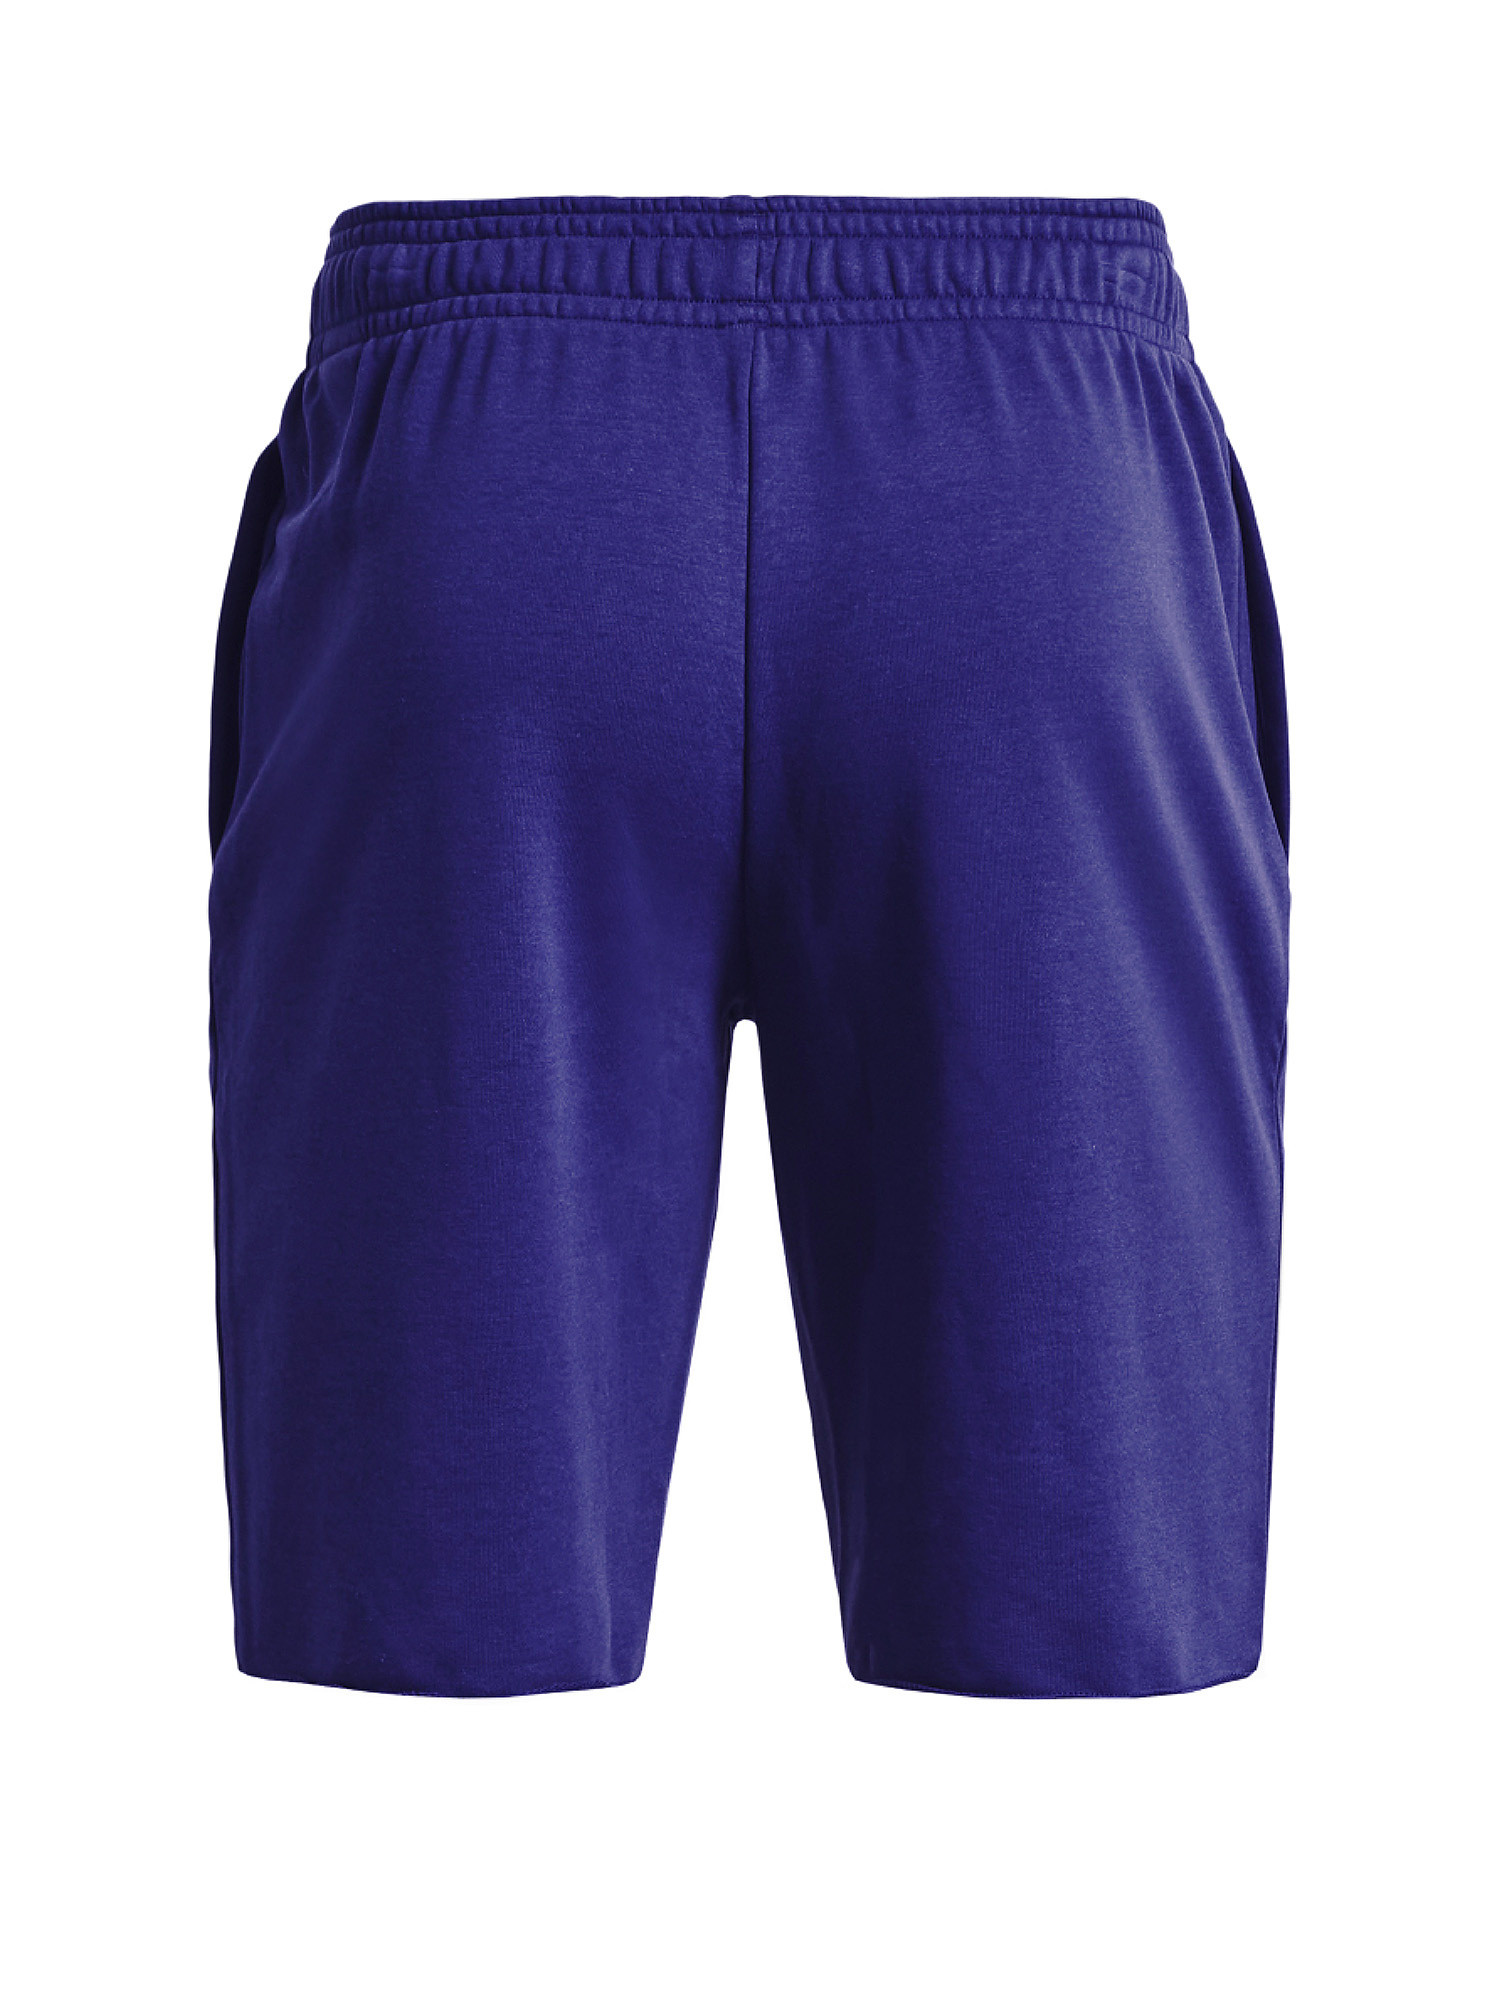 Under Armour - Shorts UA Rival Terry, Blu royal, large image number 1